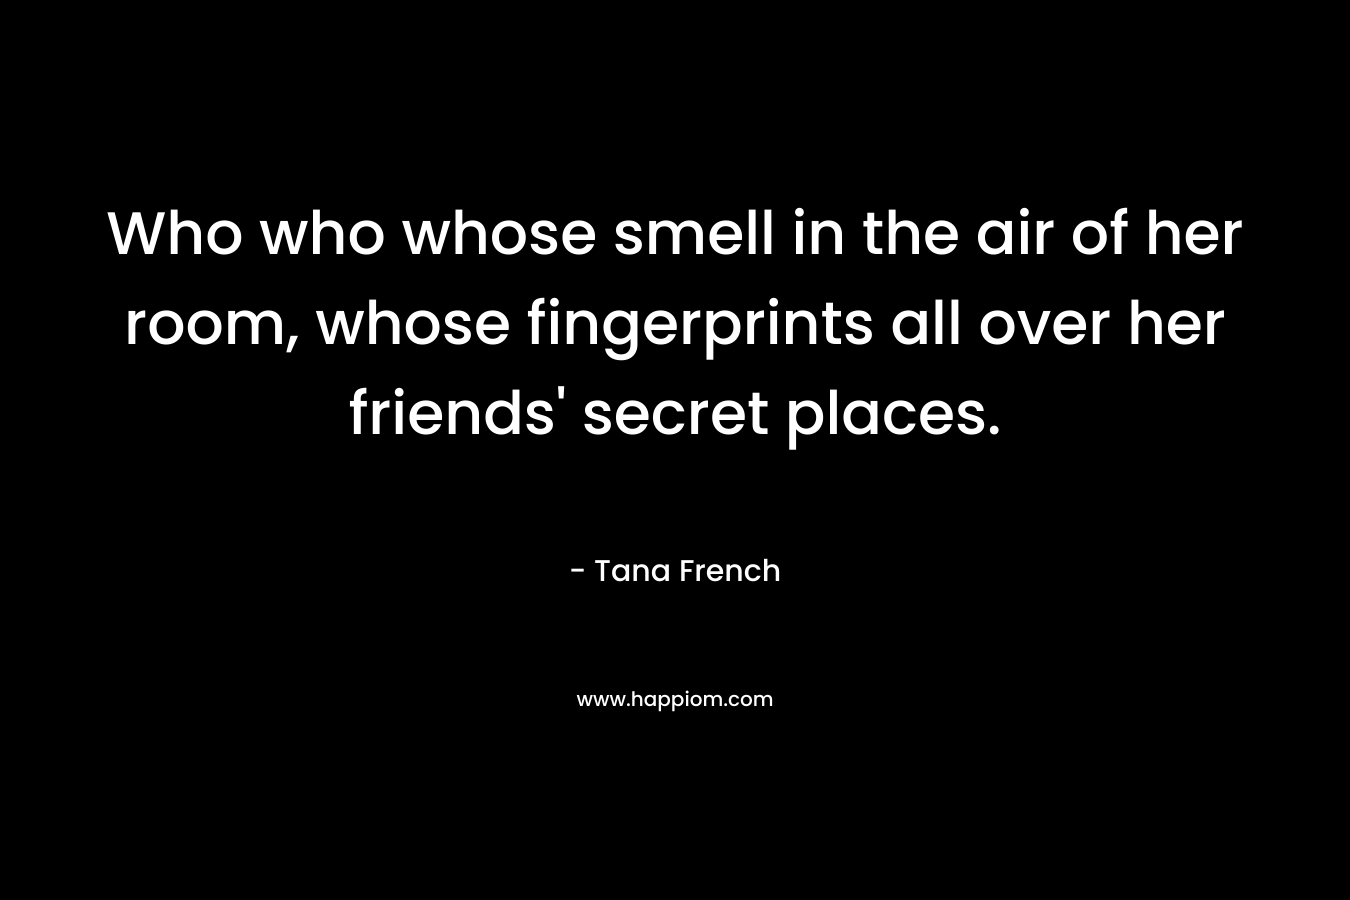 Who who whose smell in the air of her room, whose fingerprints all over her friends' secret places.